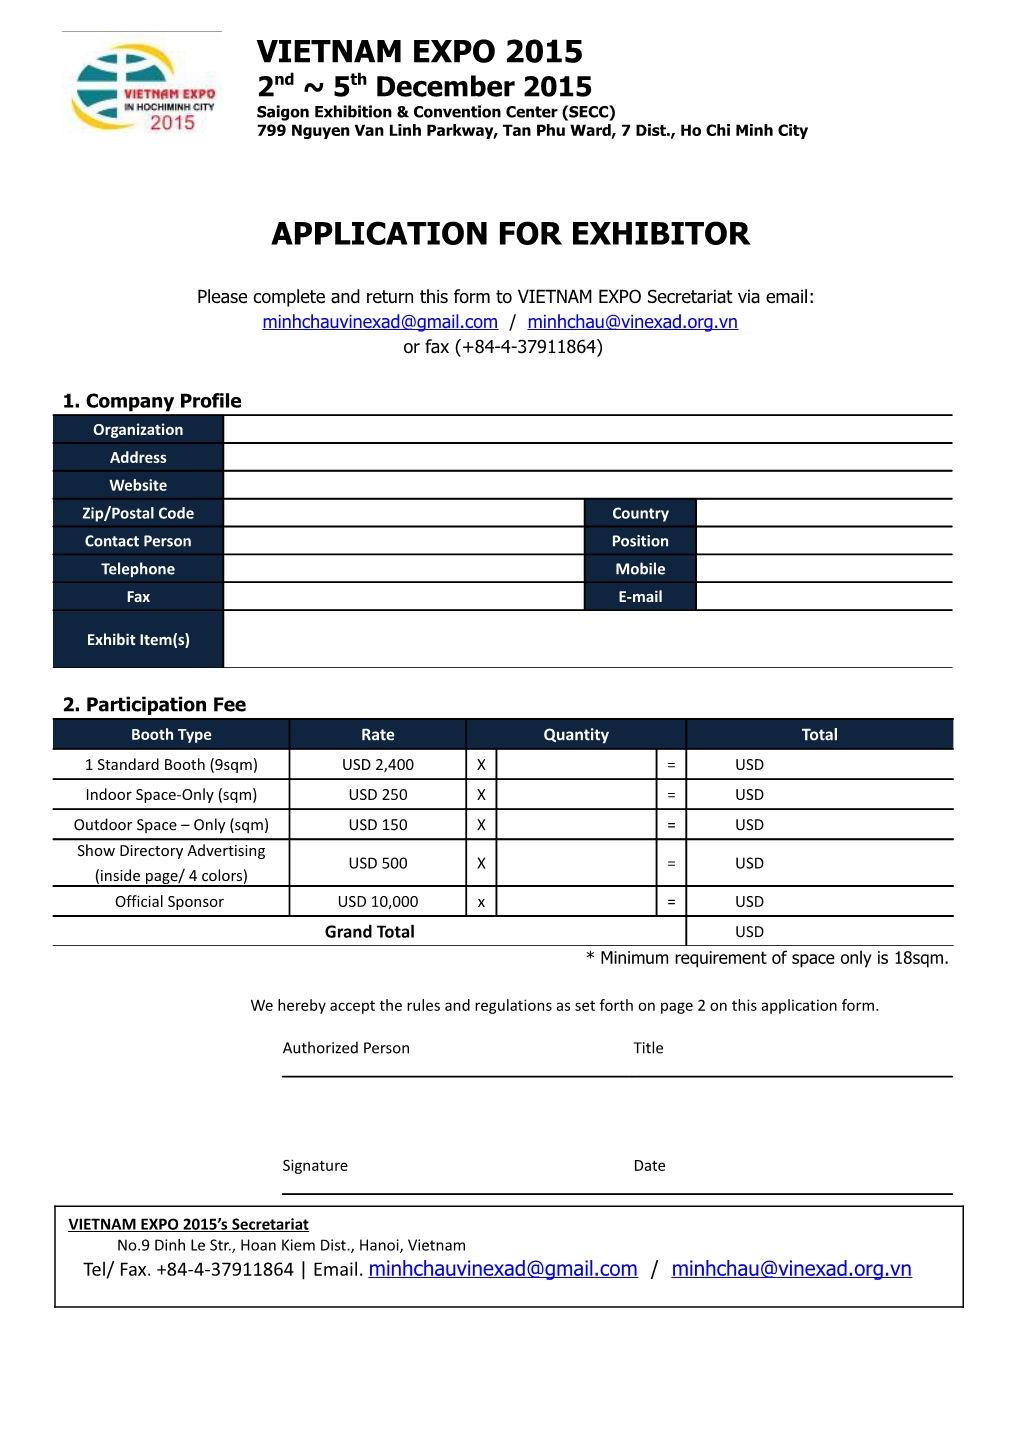 Application for Exhibitor